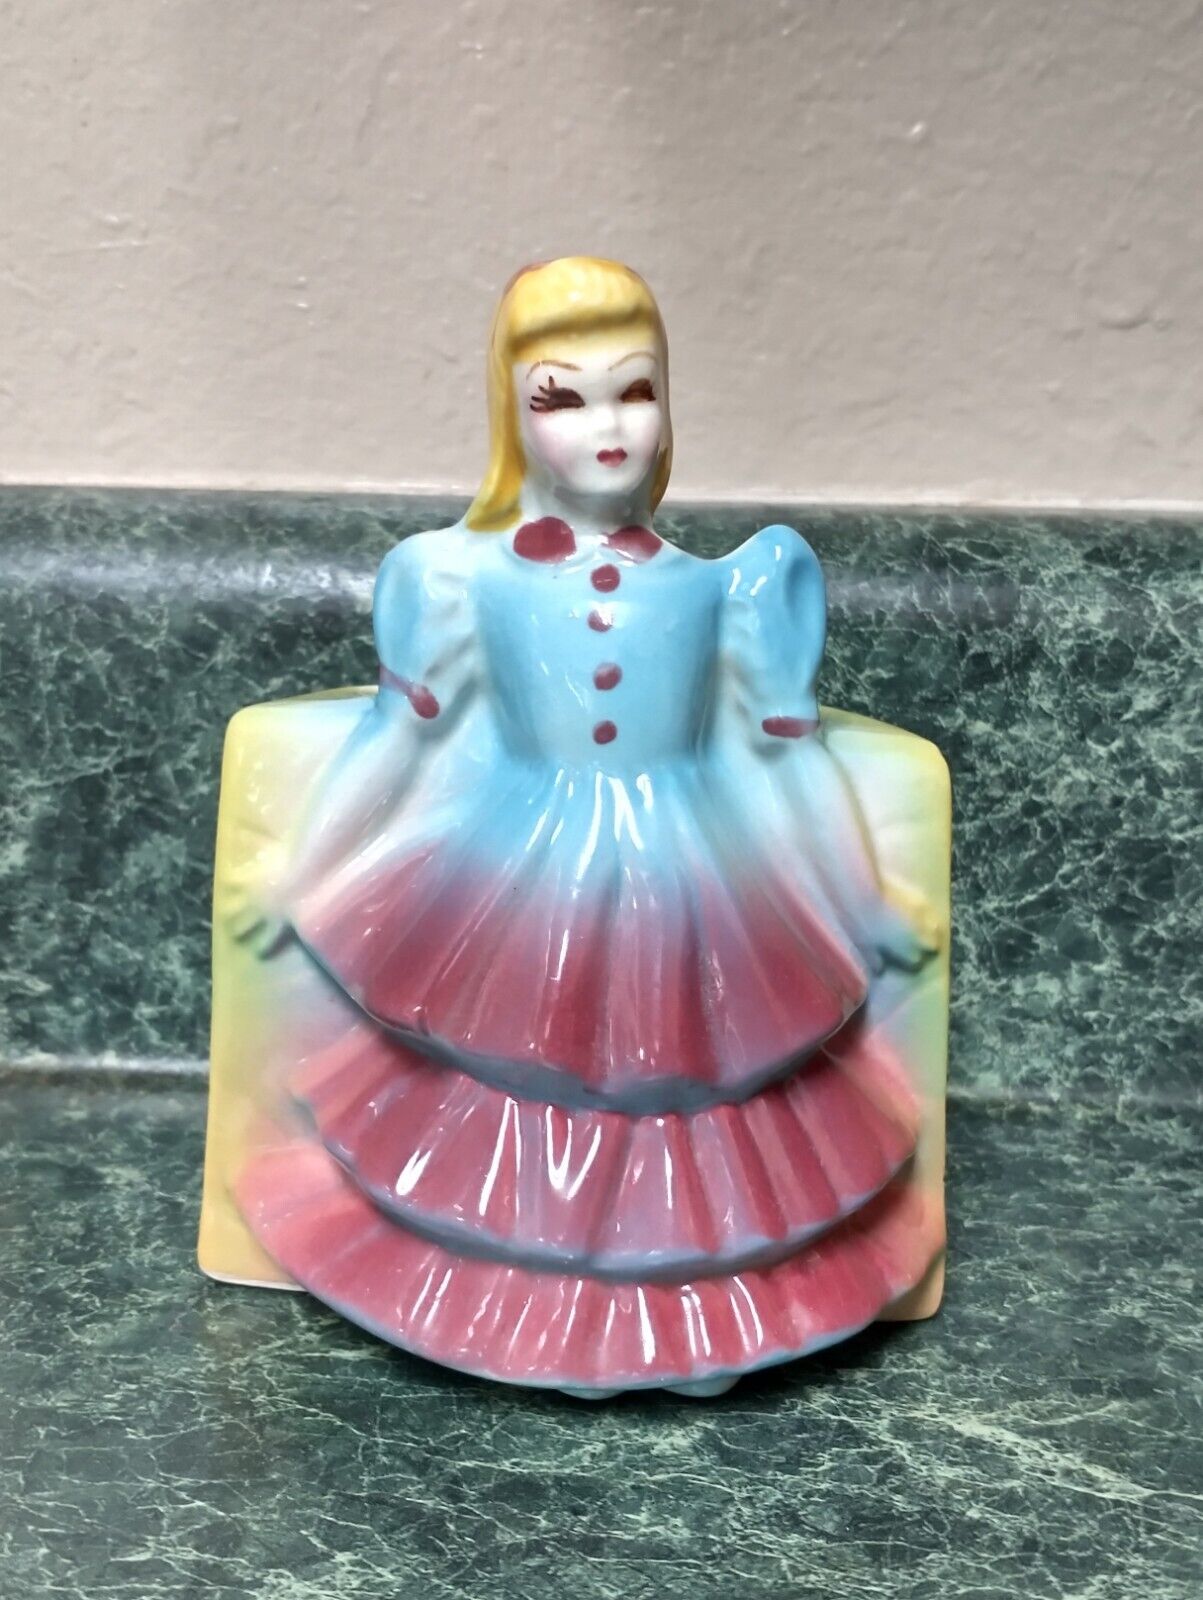 Vintage Pottery Planter - Girl In a Pink & Blue Dress American Bisque? Morton?